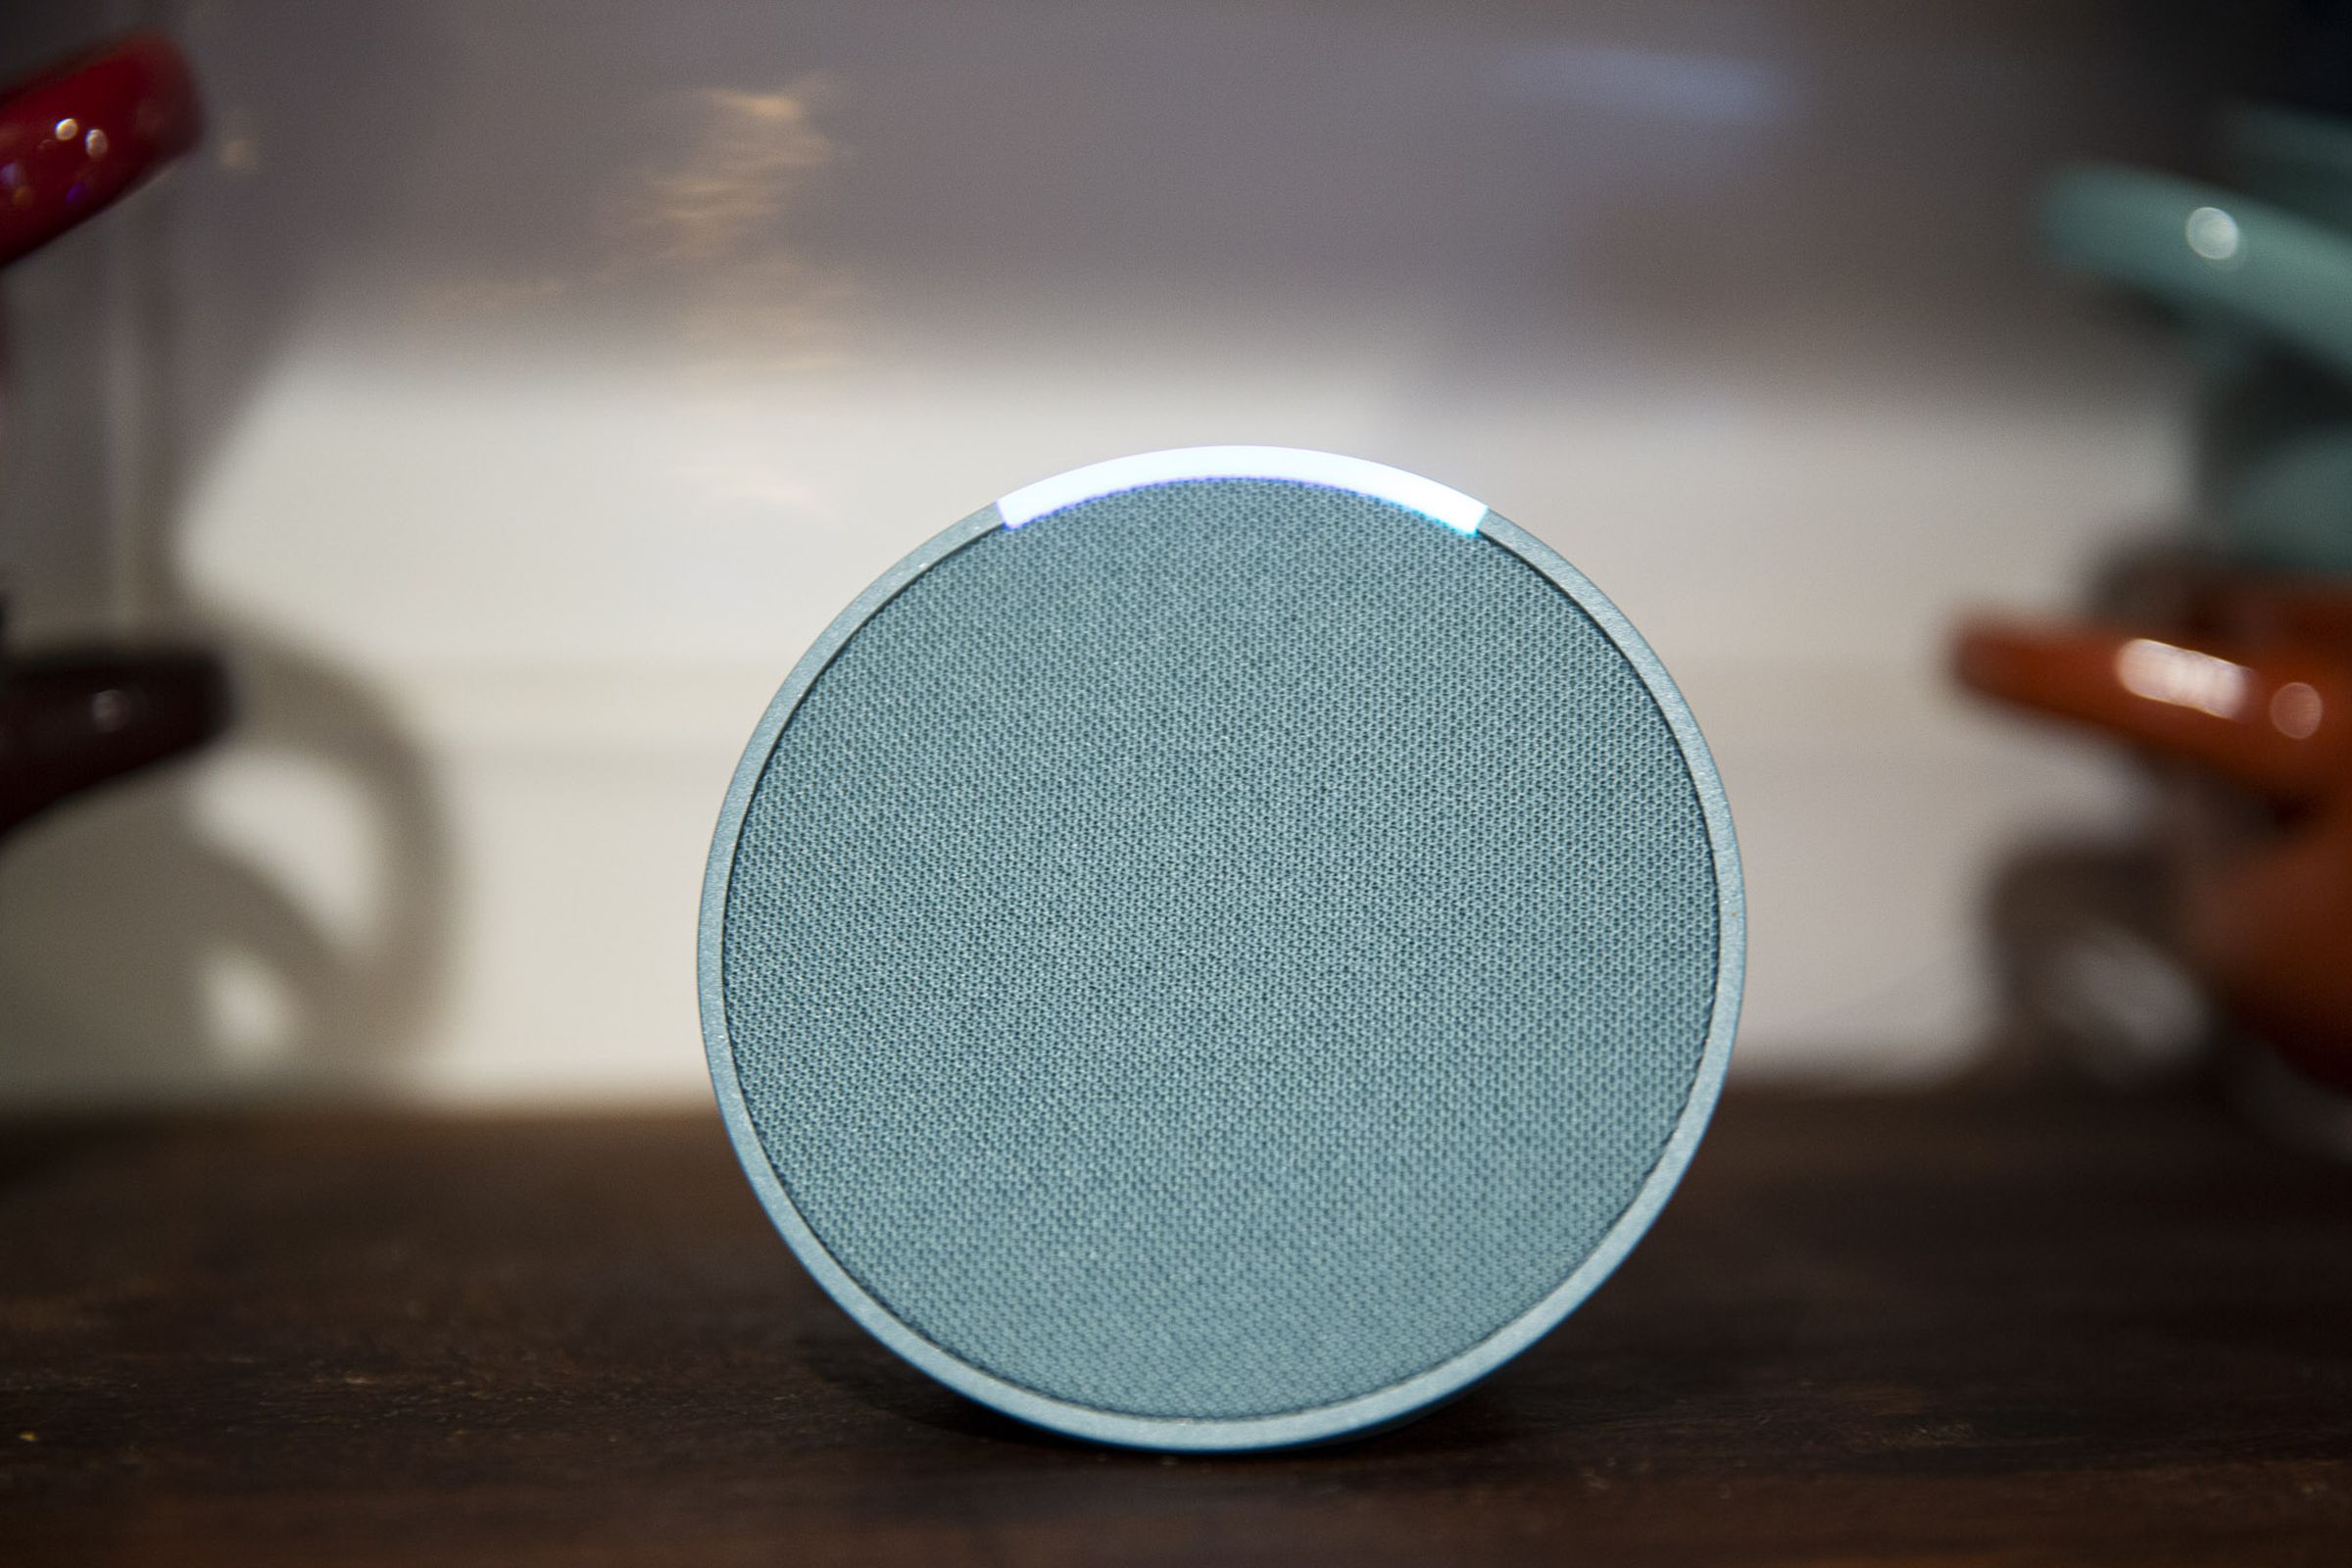 A green Echo Pop smart speaker on a countertop with its light on.